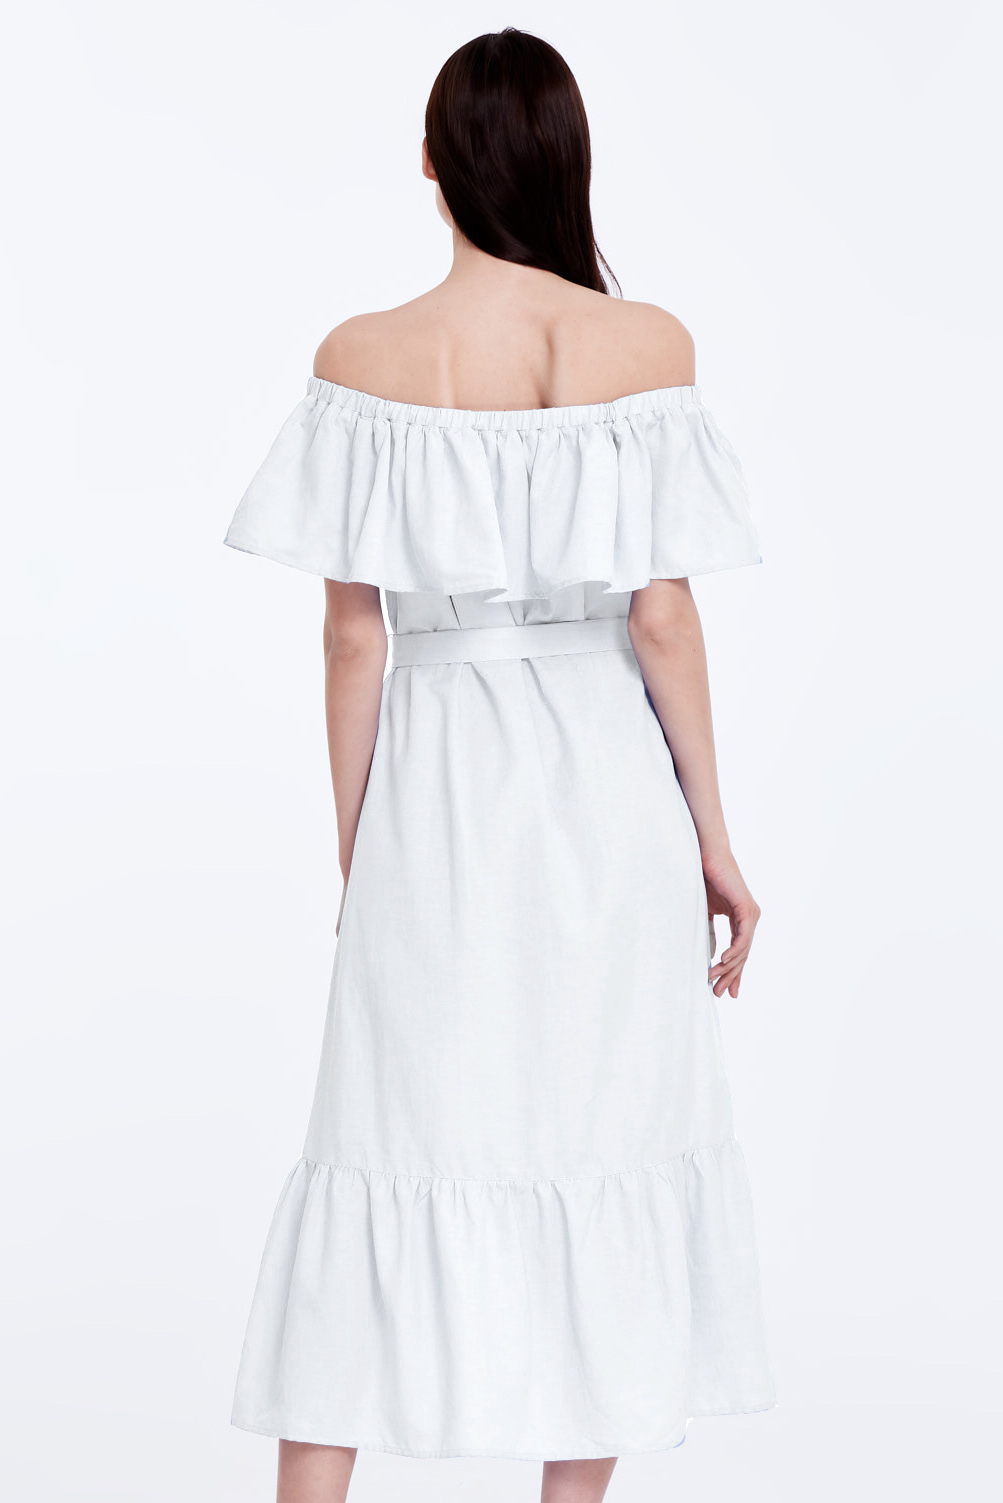 Off-shoulder white dress with a flounce , photo 4